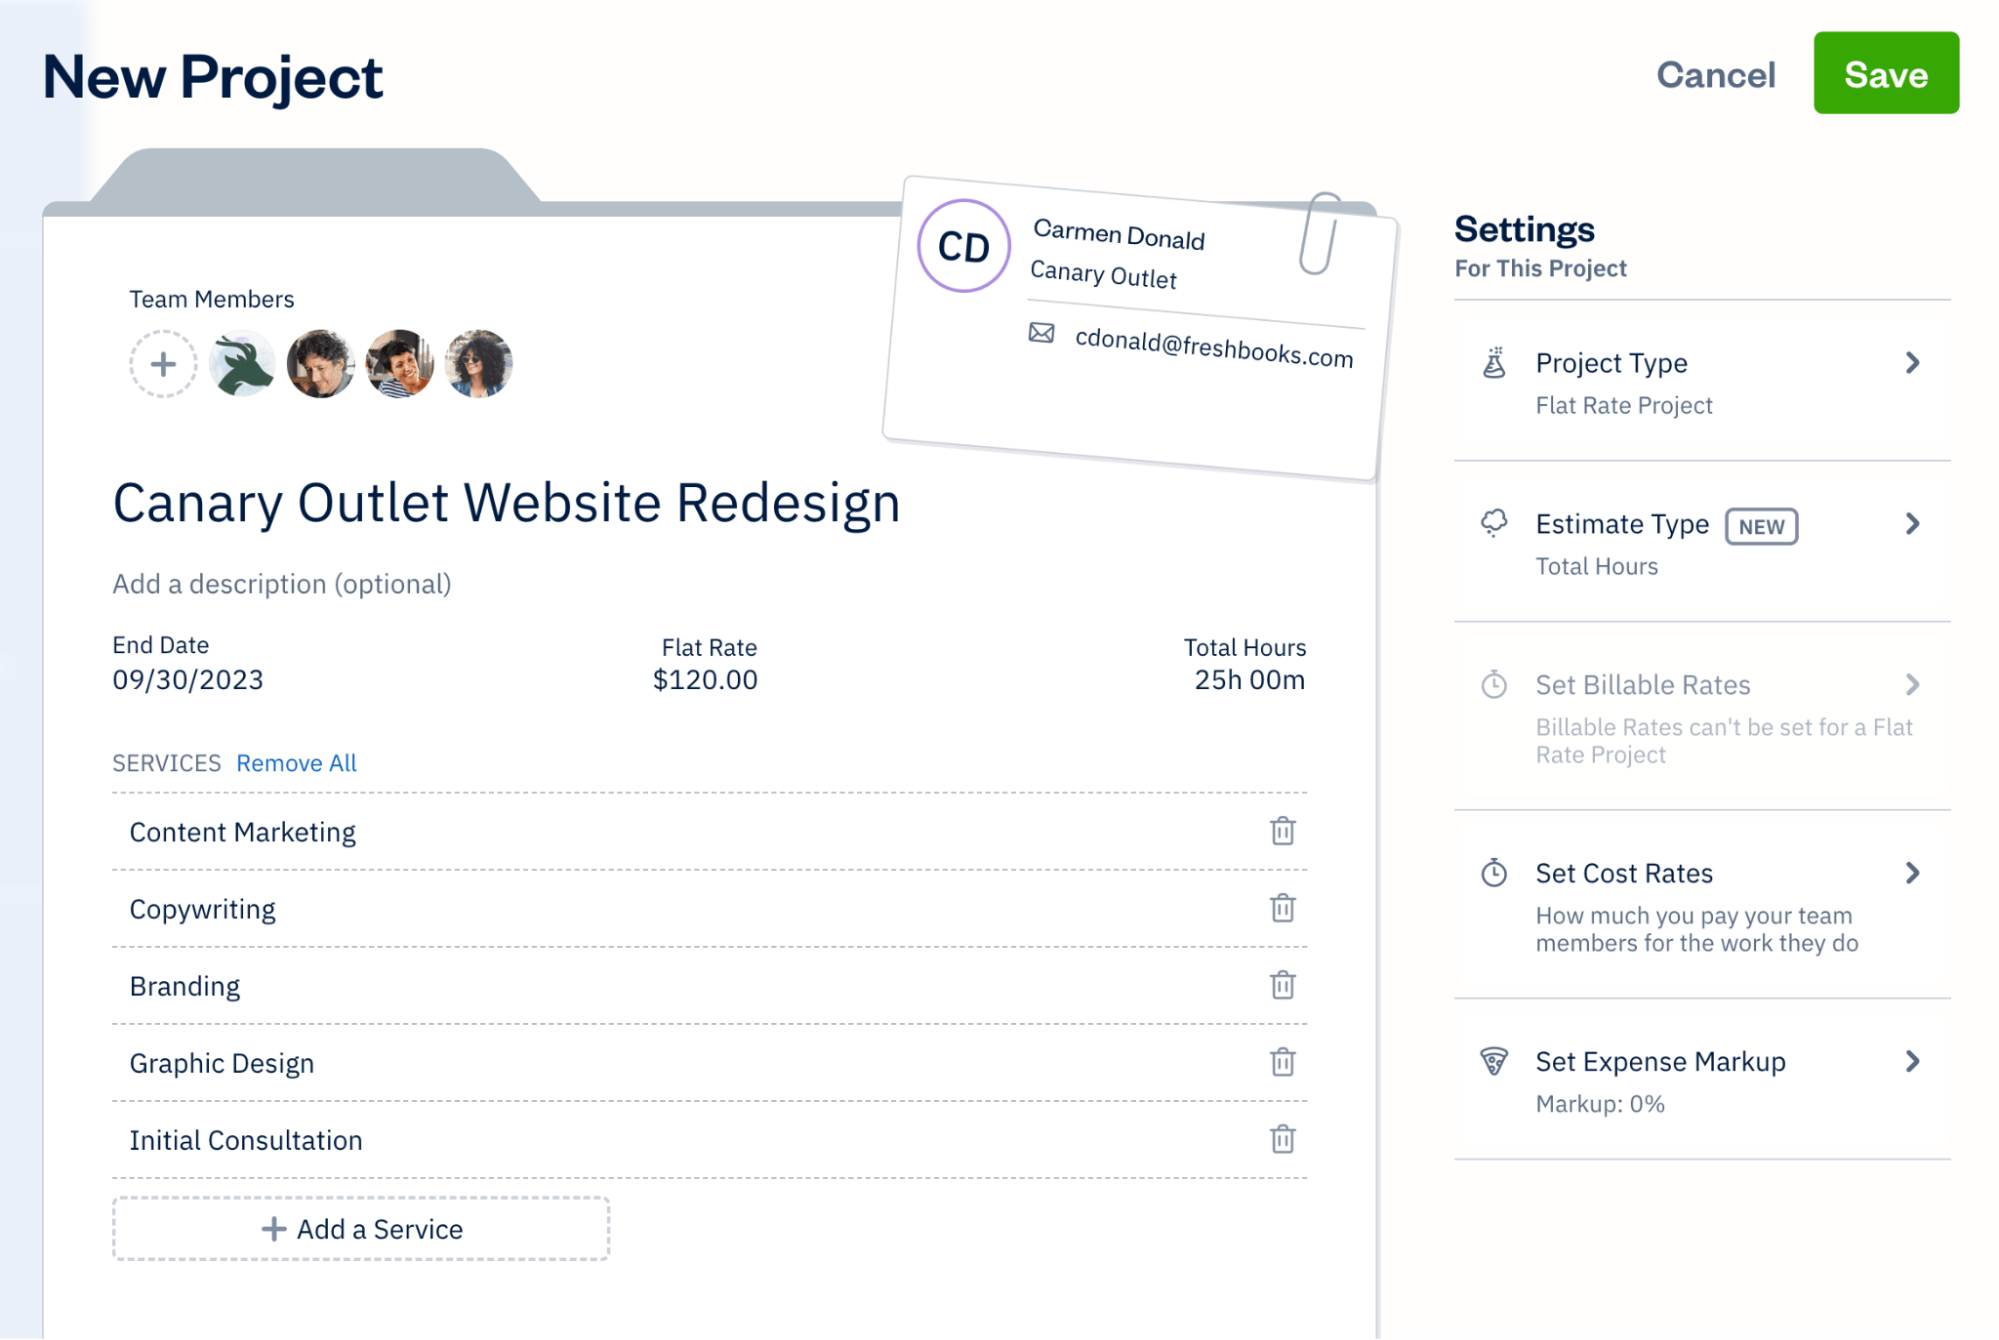 Manage Budget and Billing for Projects modal